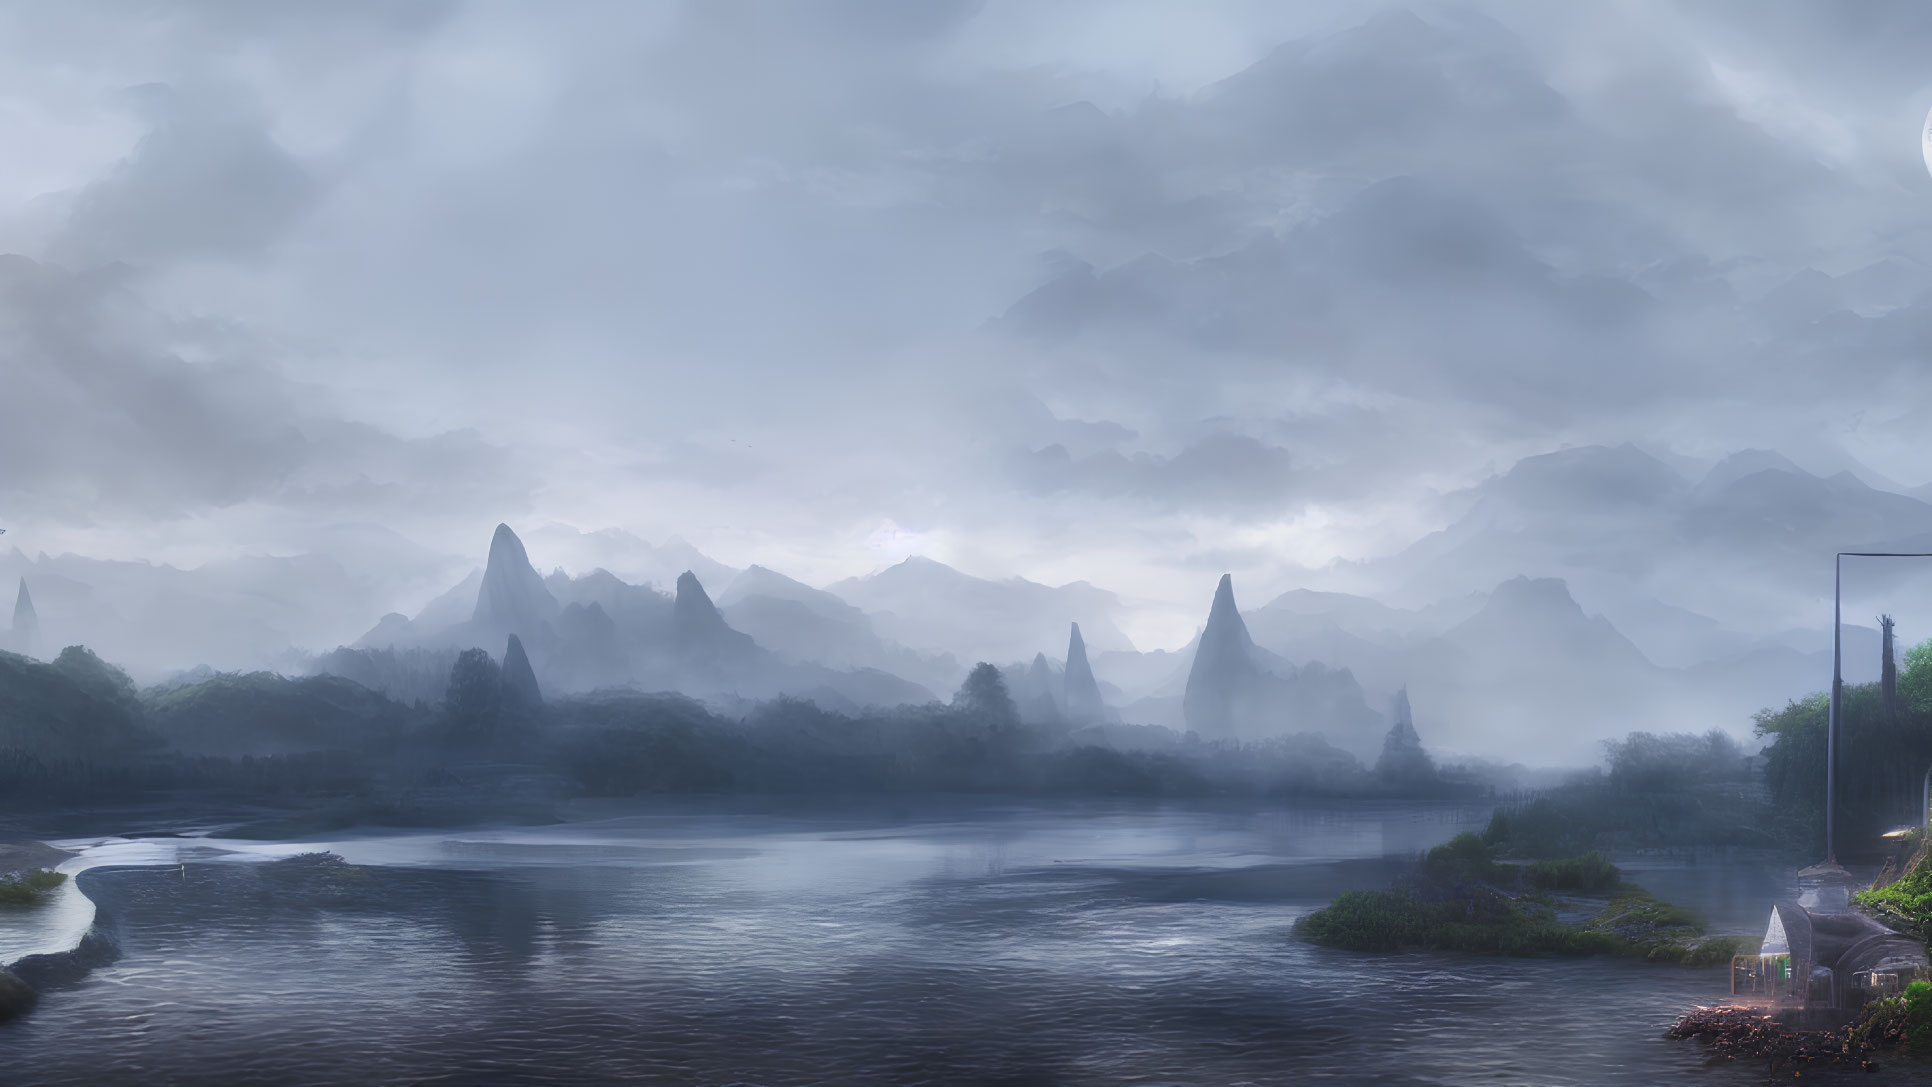 Misty mountains, serene river, crescent moon, glowing house - mystical landscape.